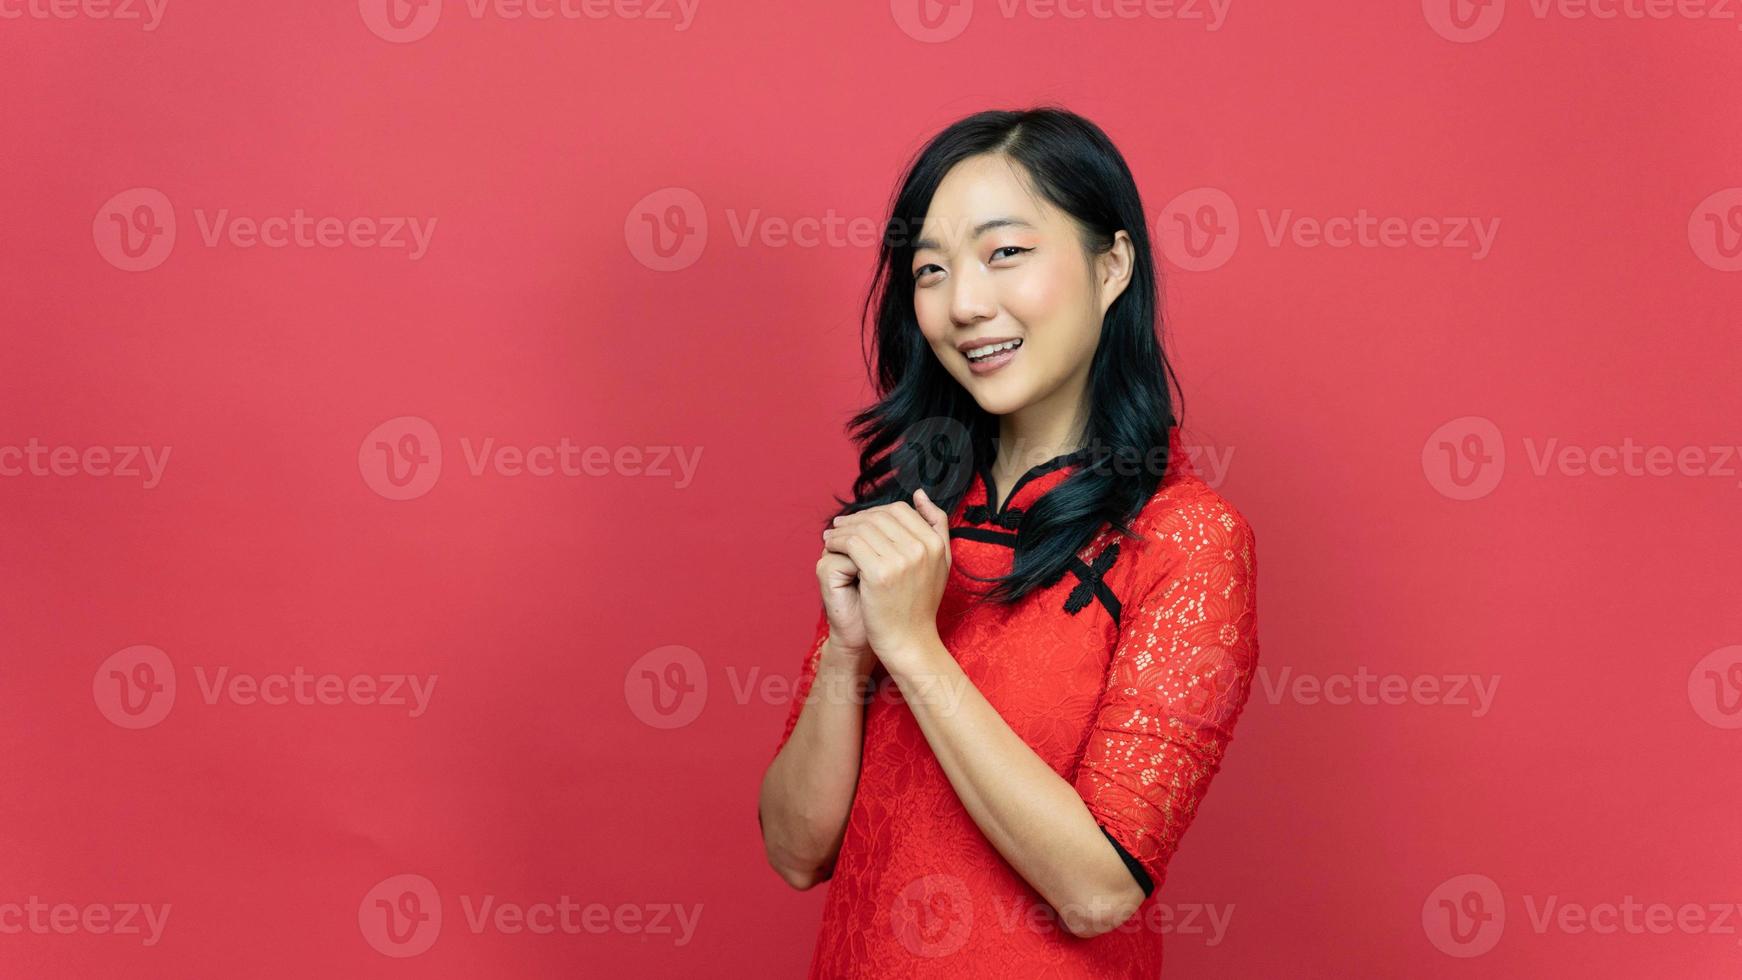 Happy Lunar Chinese New year. Beautiful woman wearing traditional cheongsam qipao dress posing pray wish luck isolated on red background. Emotion smile photo